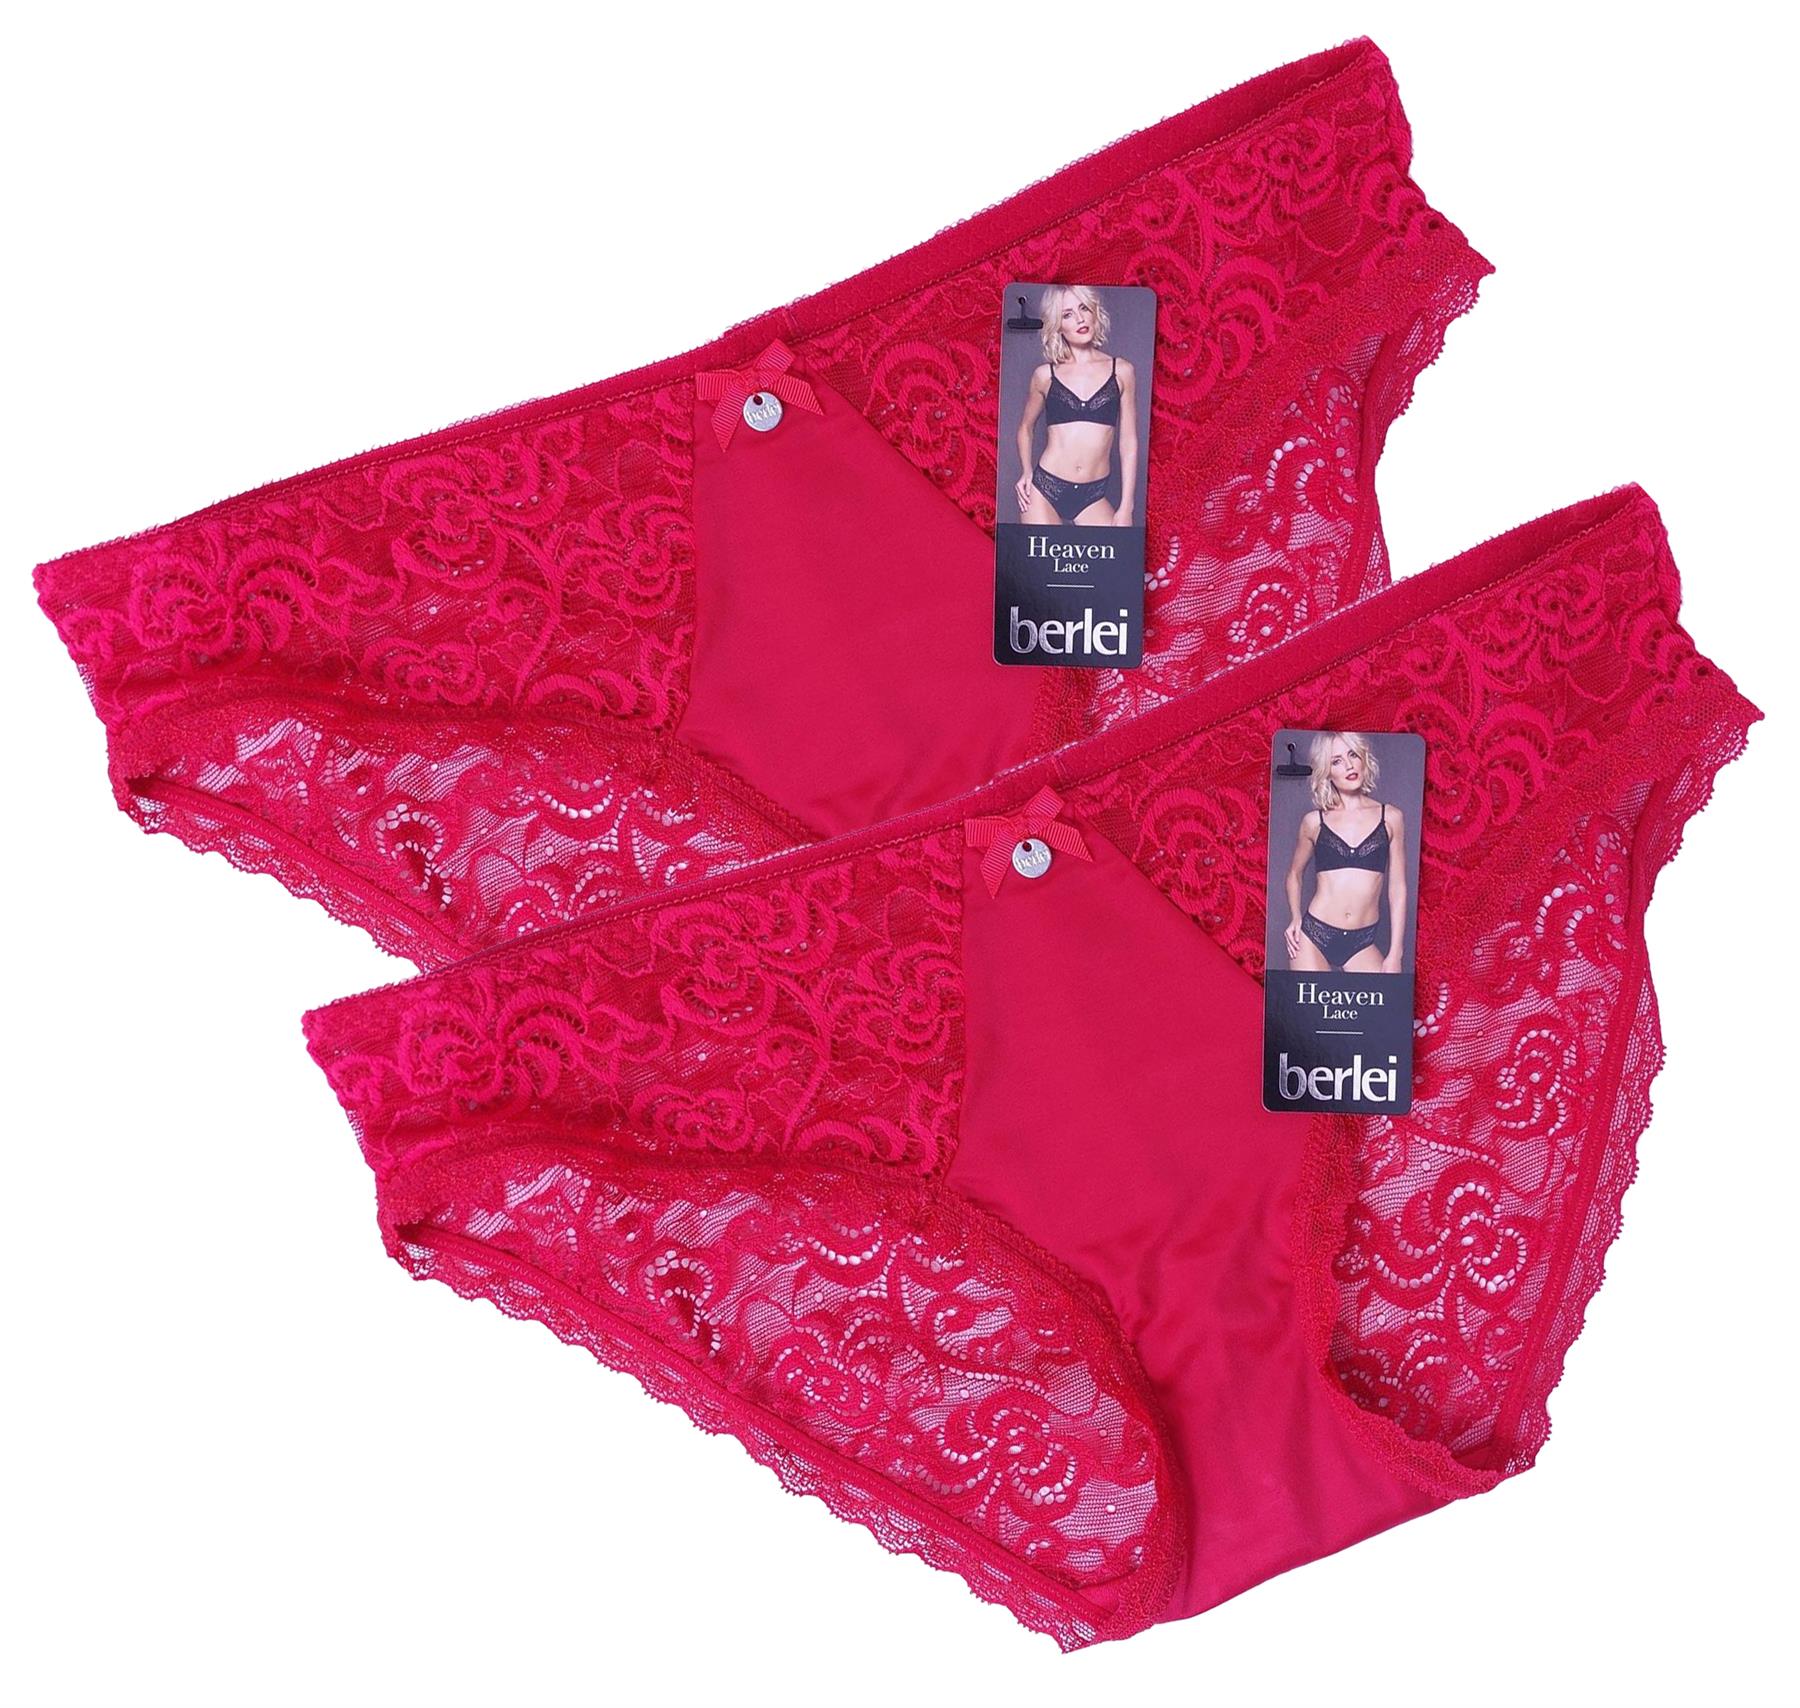 2-Pack Berlei Lace Brief Knickers Comfort Heaven Brand New Passion Red –  Worsley_wear